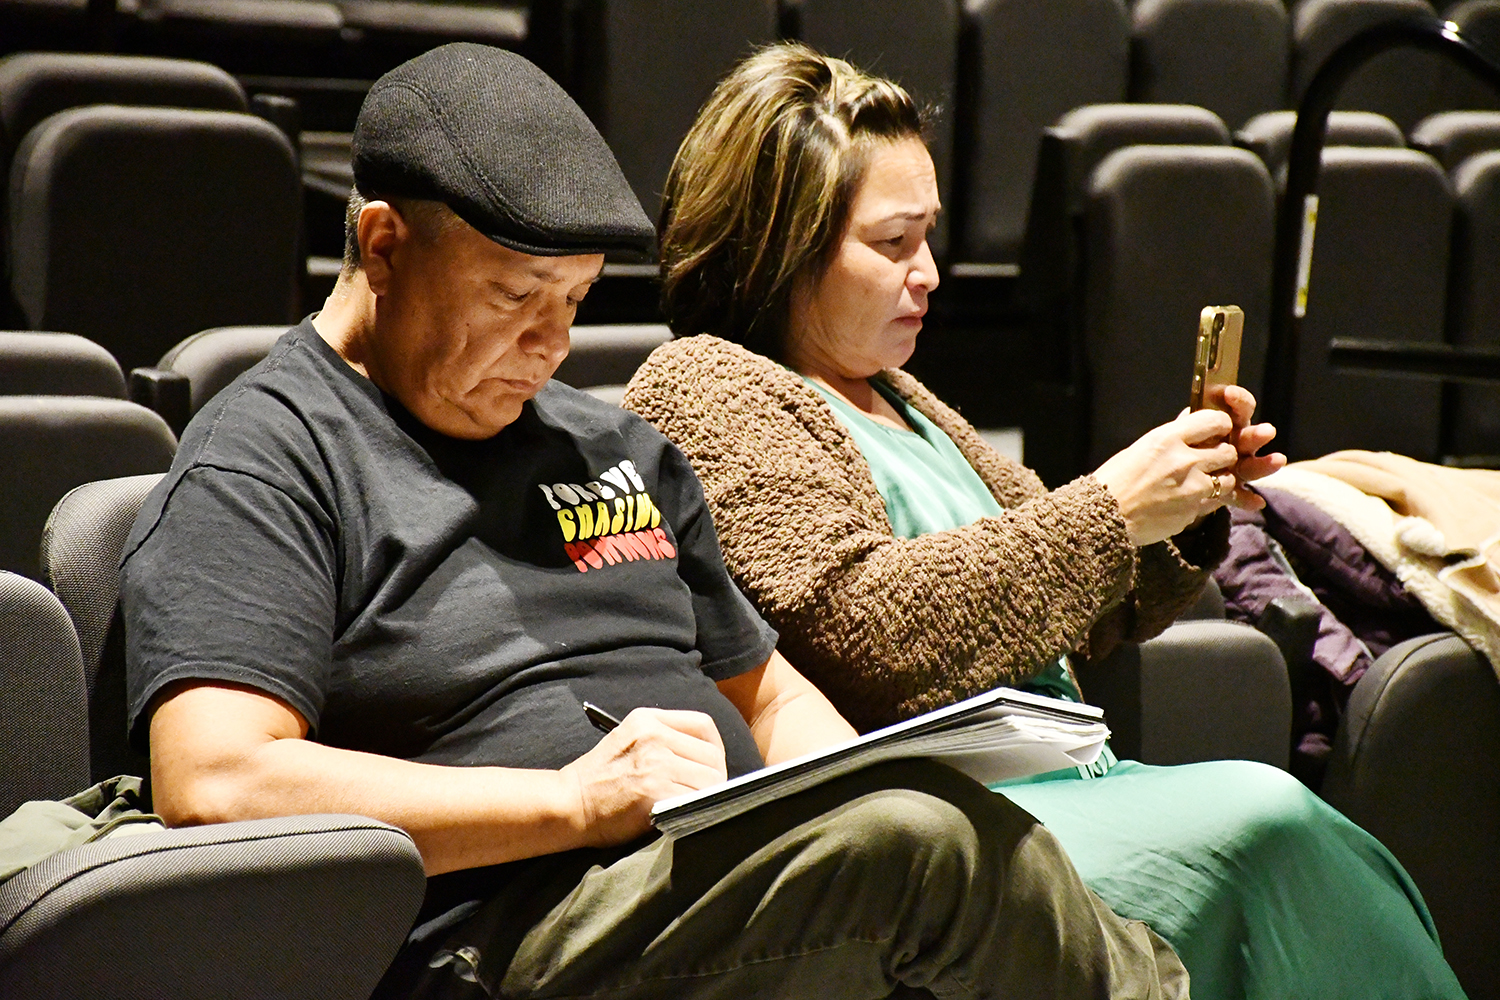 Ralph Morin and Dolores Pahtayken, researchers at Onion Lake Cree Nation, take notes and recordings during an event for Elders to share stories and knowledge in Cree. (Photo by Sarah MacDonald)